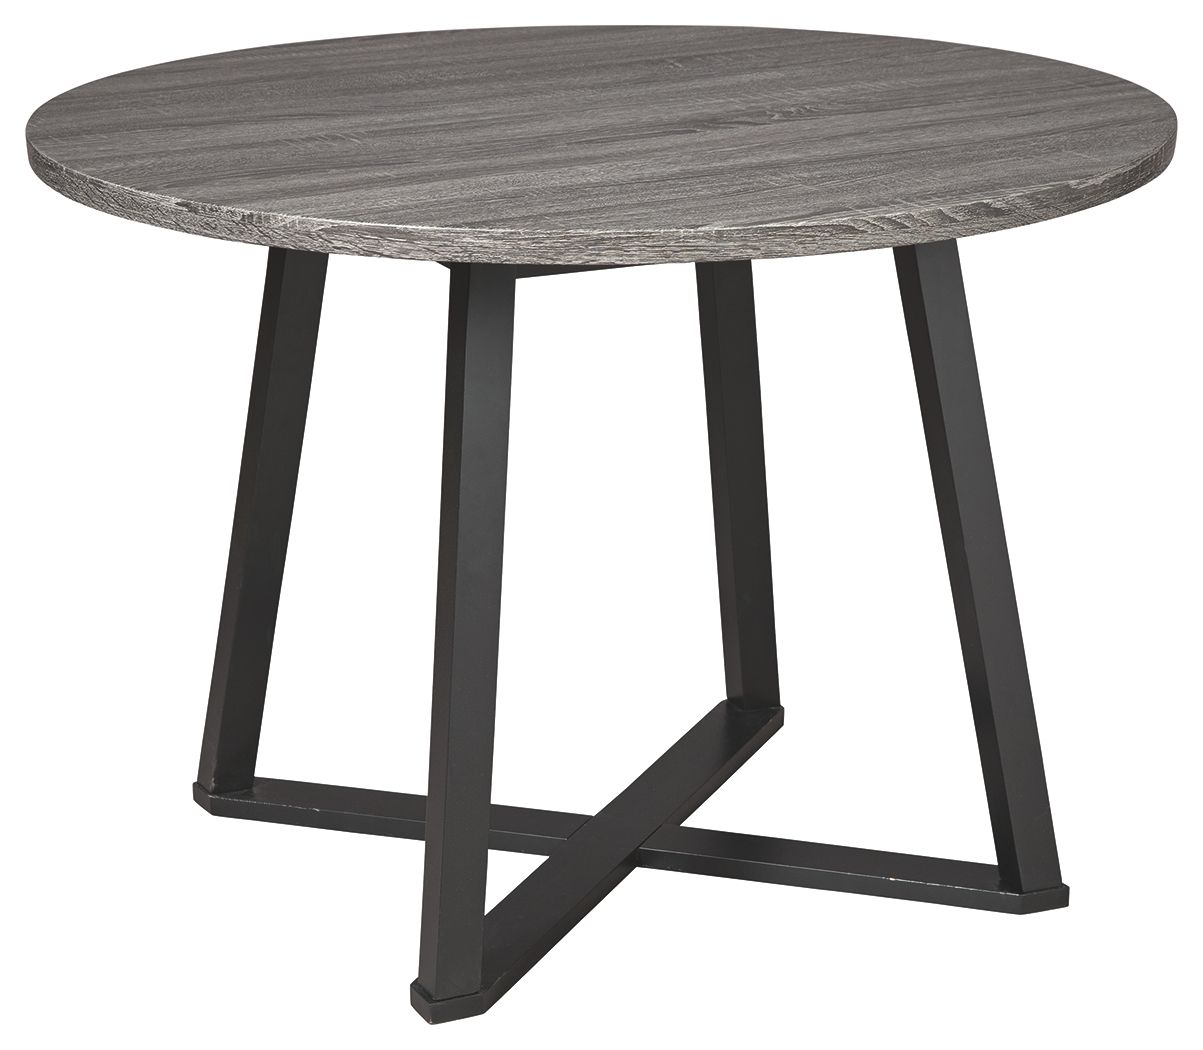 Centiar - Round Dining Table Set - Tony's Home Furnishings